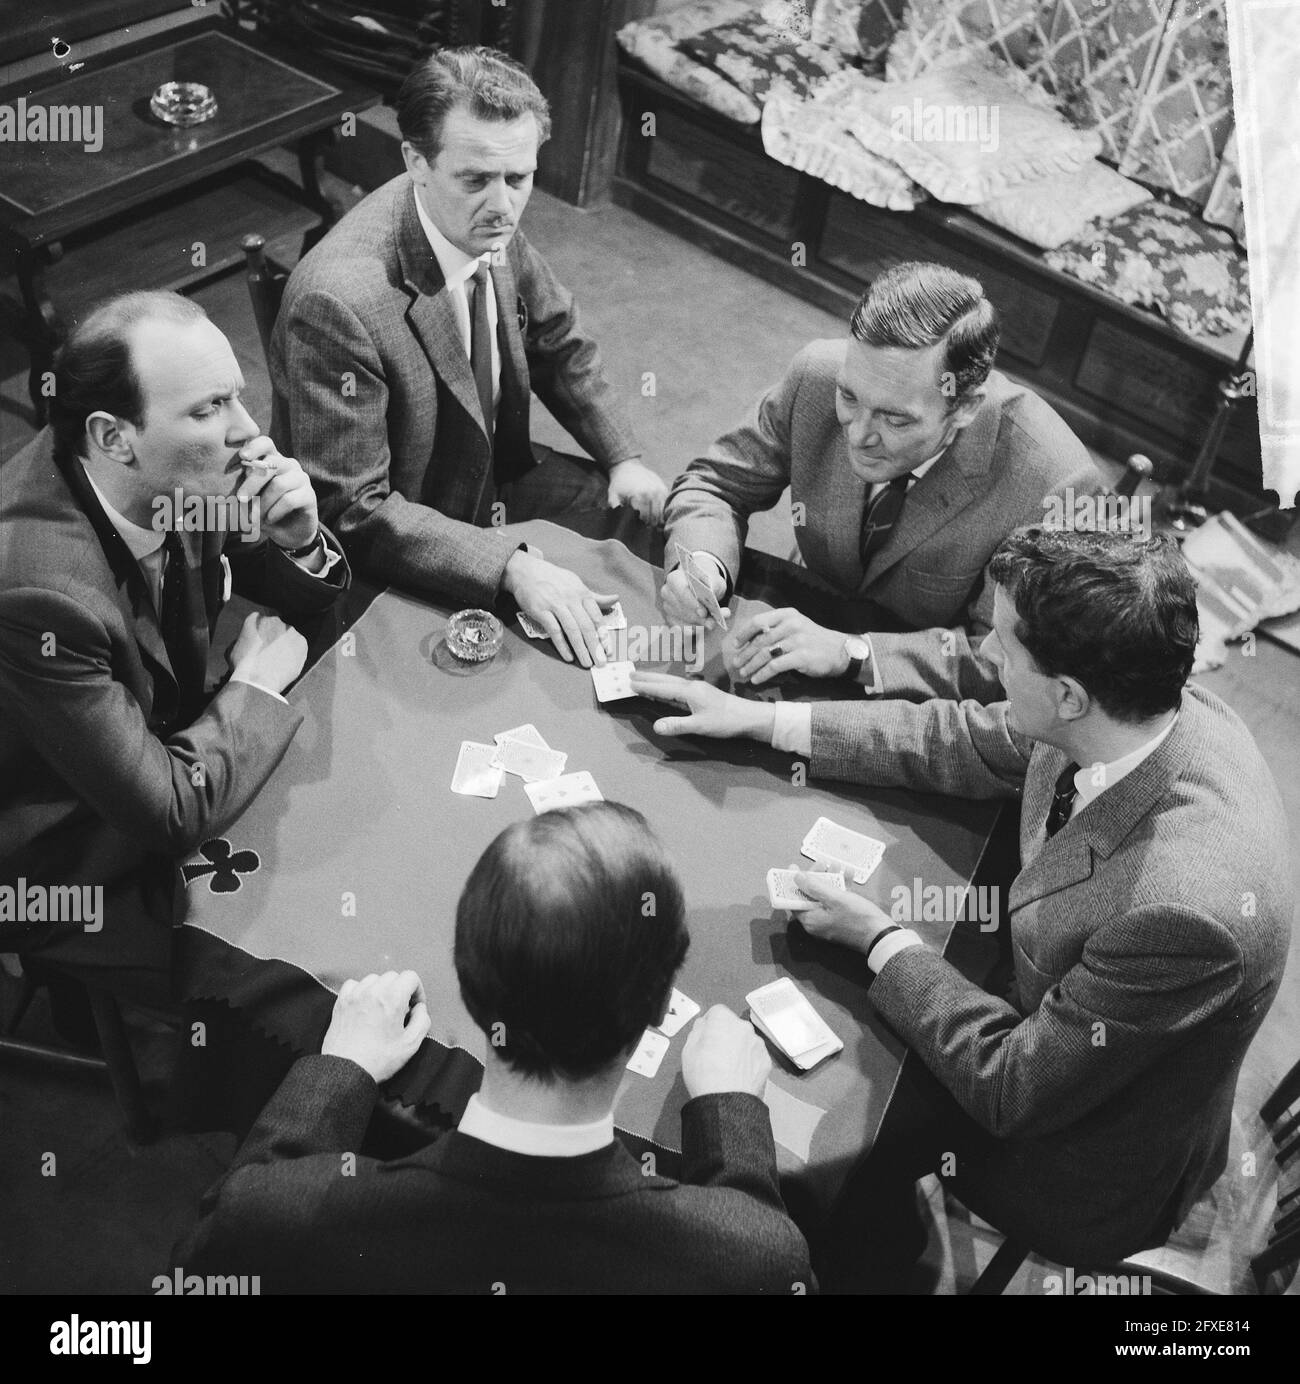 Television rehearsal Poker. Andre van den Heuvel, Peter Aryans, Pim Dikkers, Luc Lutz, June 8, 1961, Television rehearsals, The Netherlands, 20th century press agency photo, news to remember, documentary, historic photography 1945-1990, visual stories, human history of the Twentieth Century, capturing moments in time Stock Photo